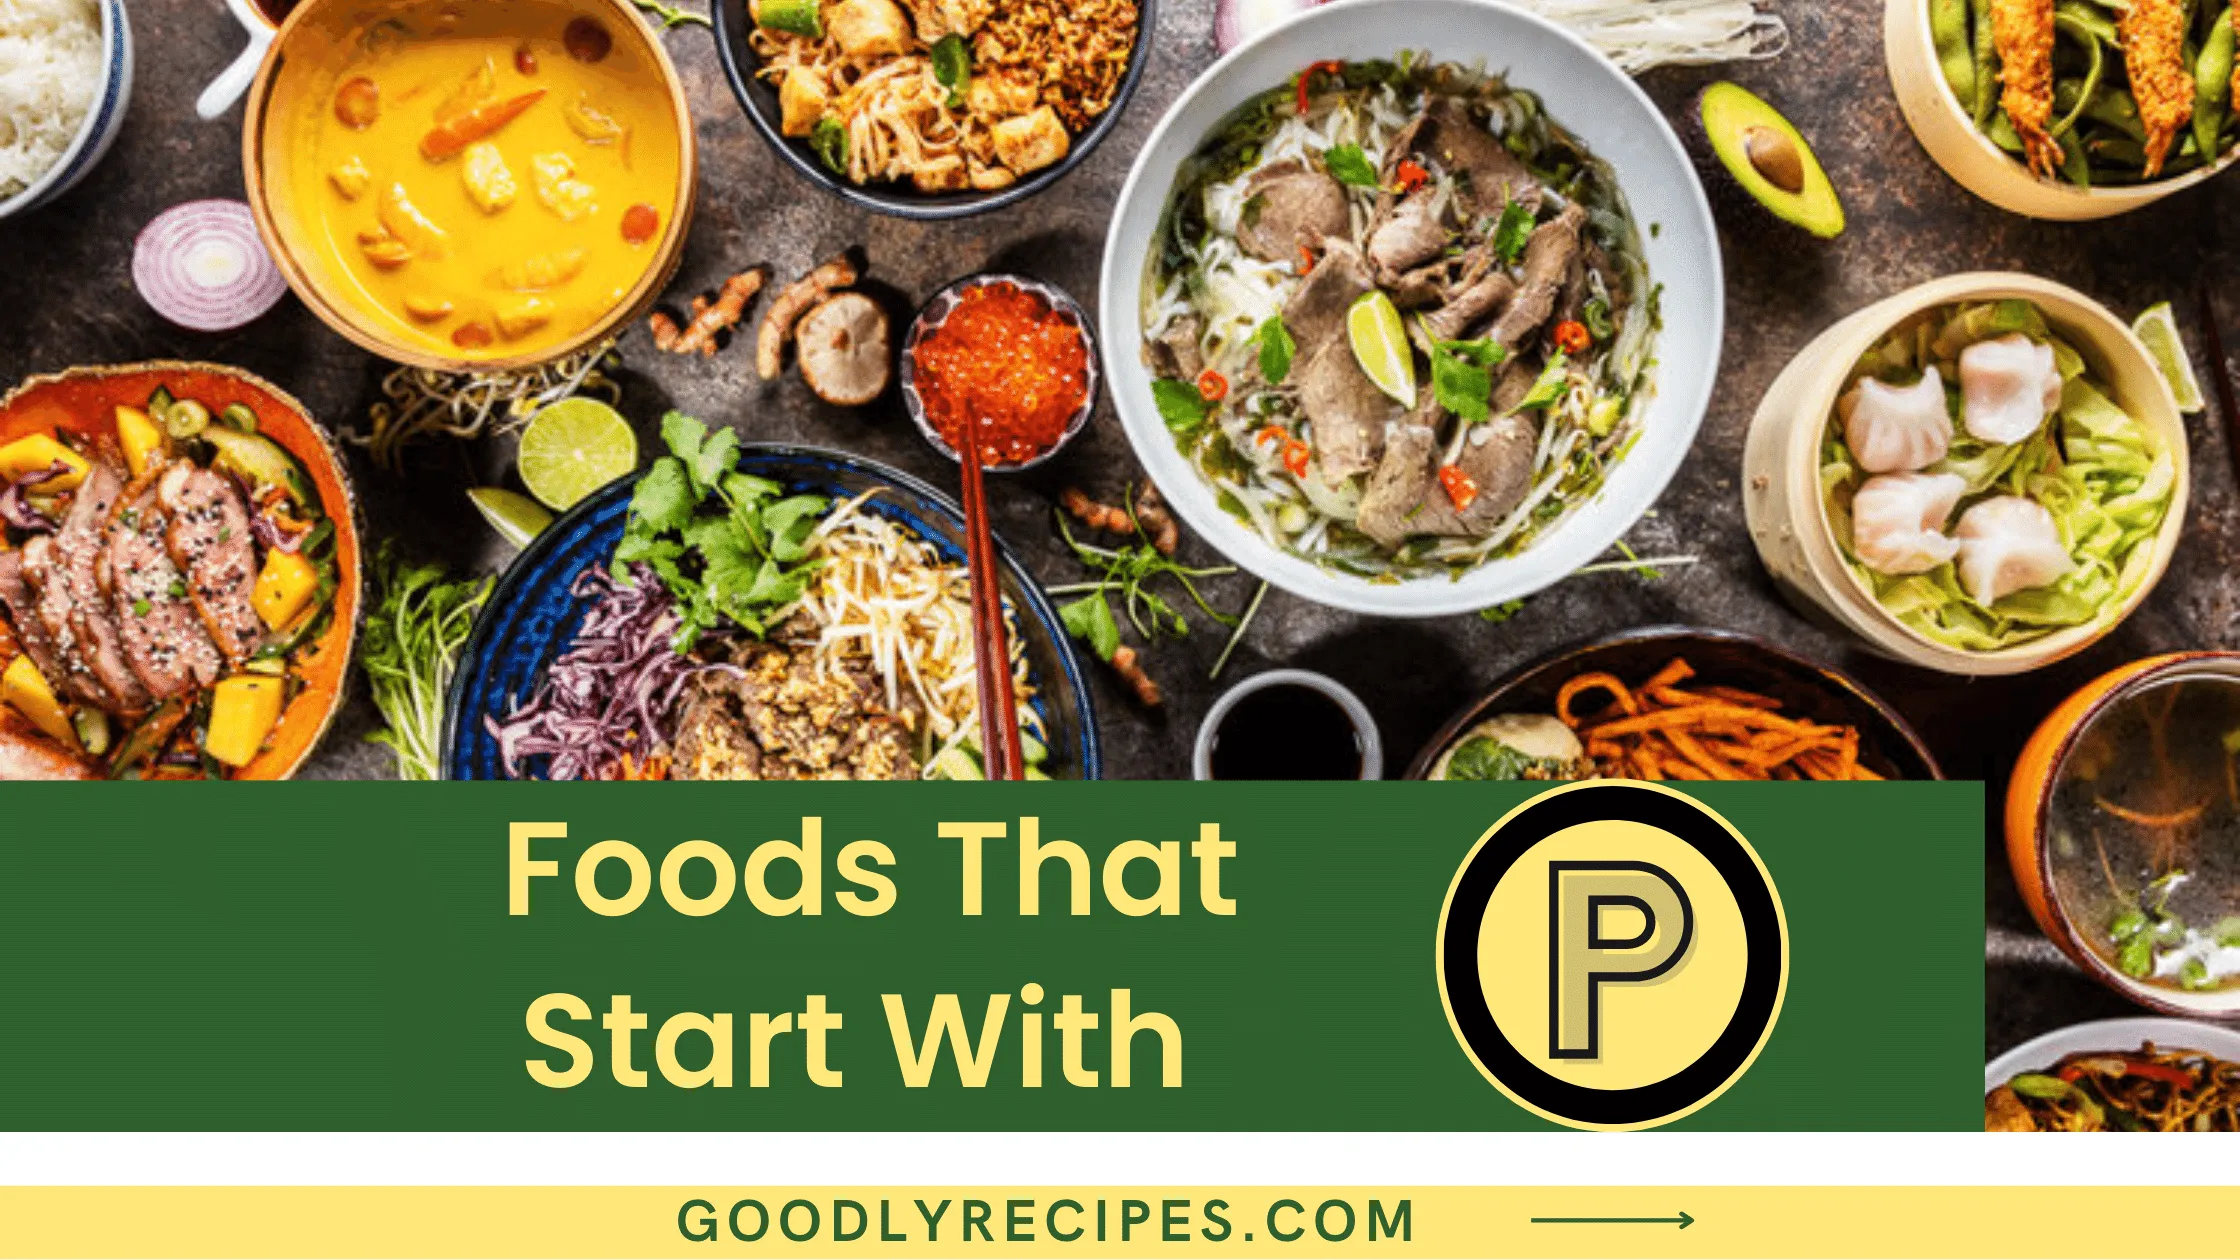 Foods That Start With P - Special Dishes